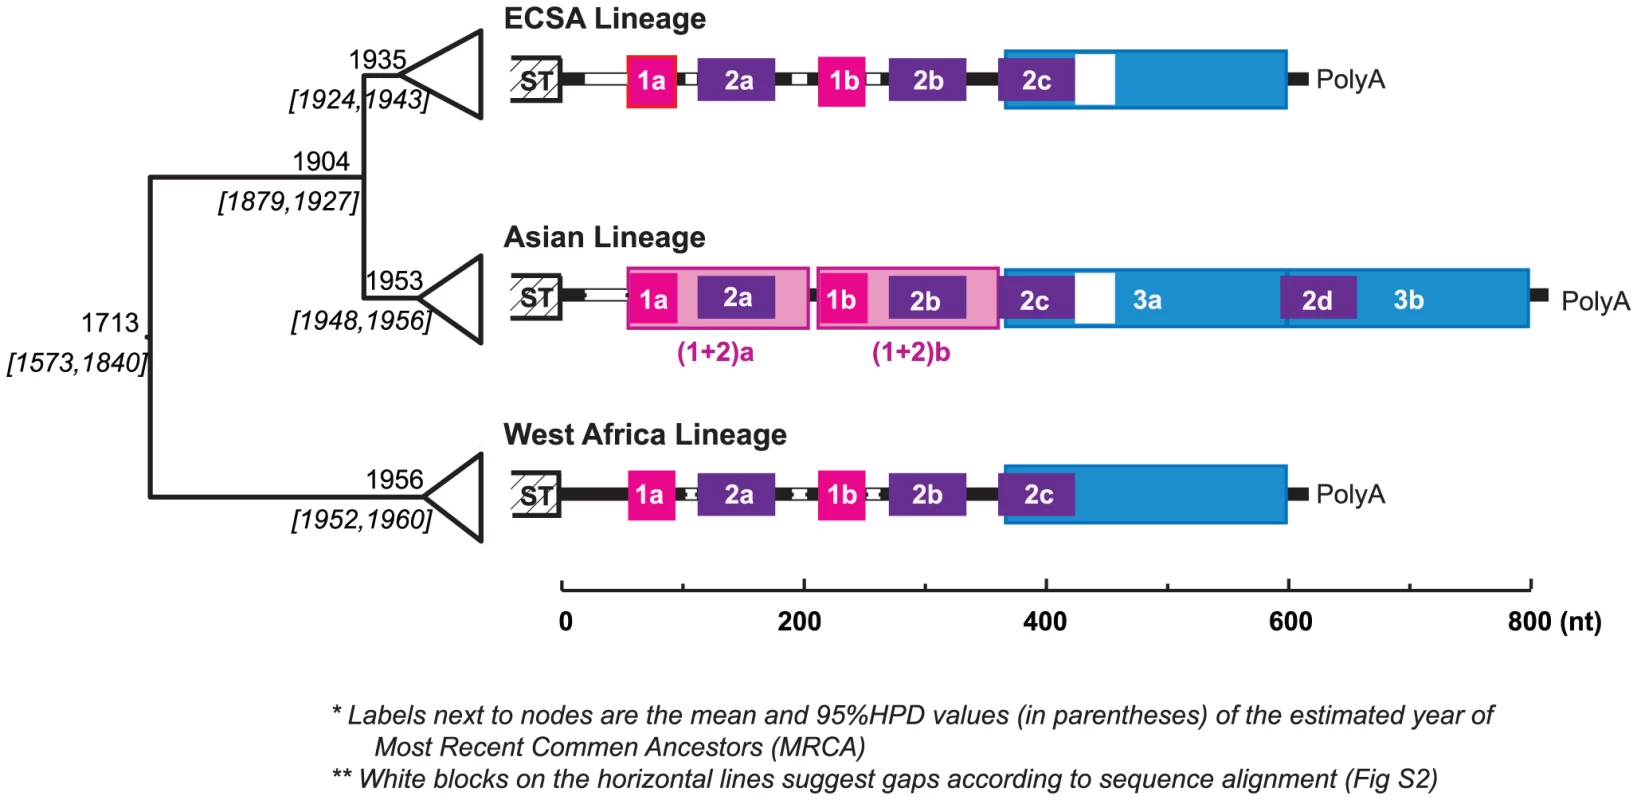 Evolution history and lineage-specific structures of the CHIKV 3′UTR.